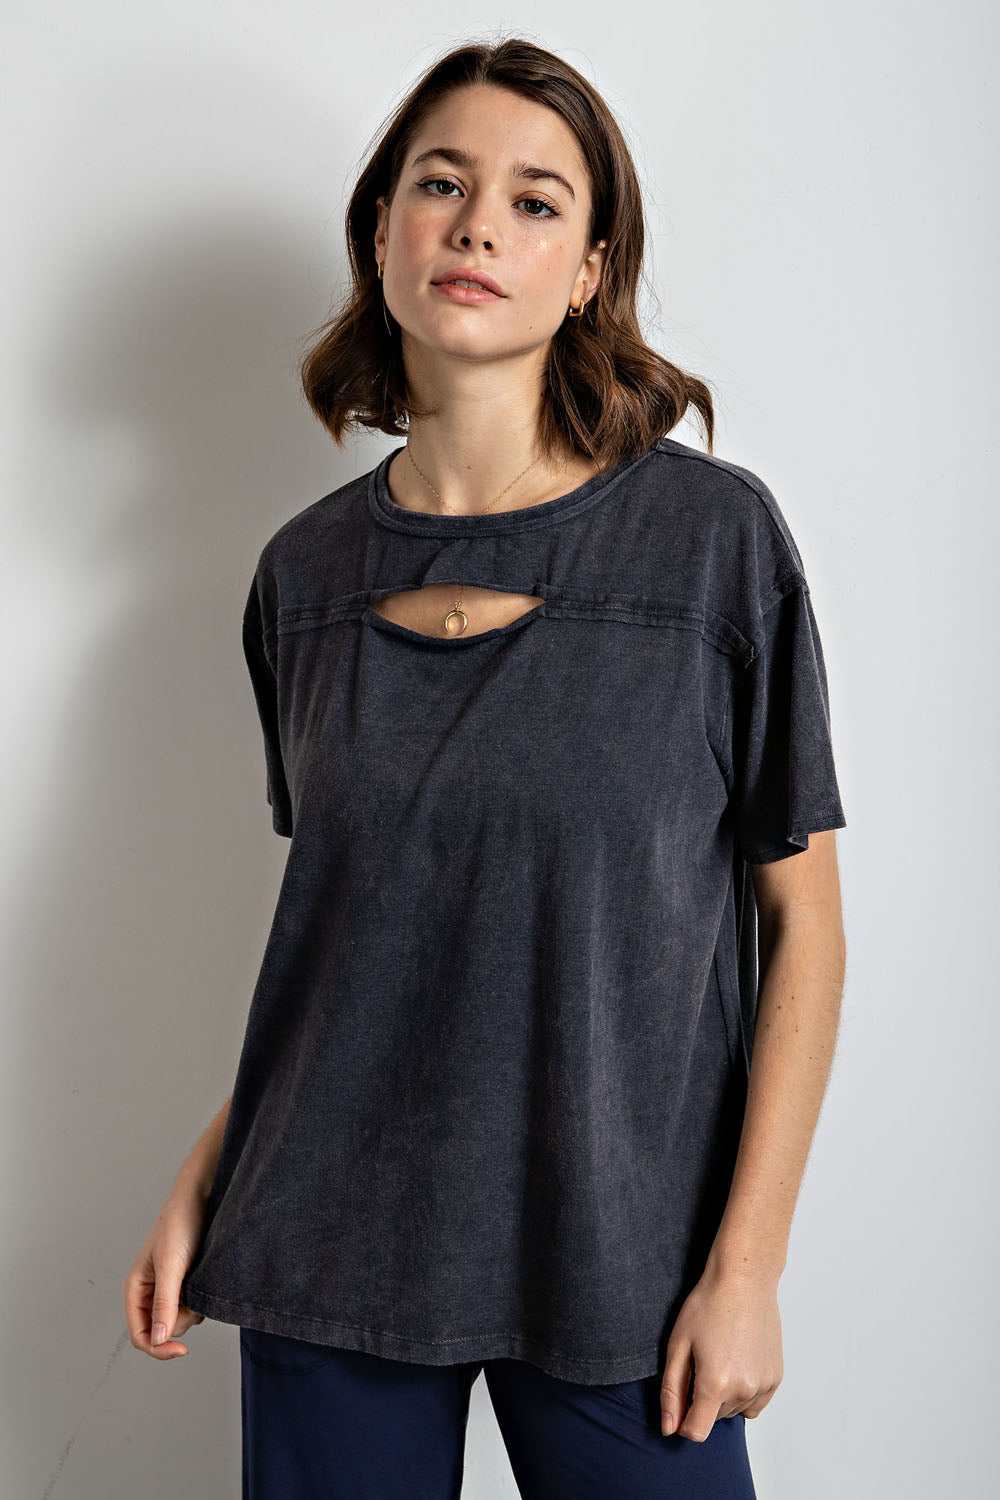 Mineral wash keyhole shirt by RaeMode